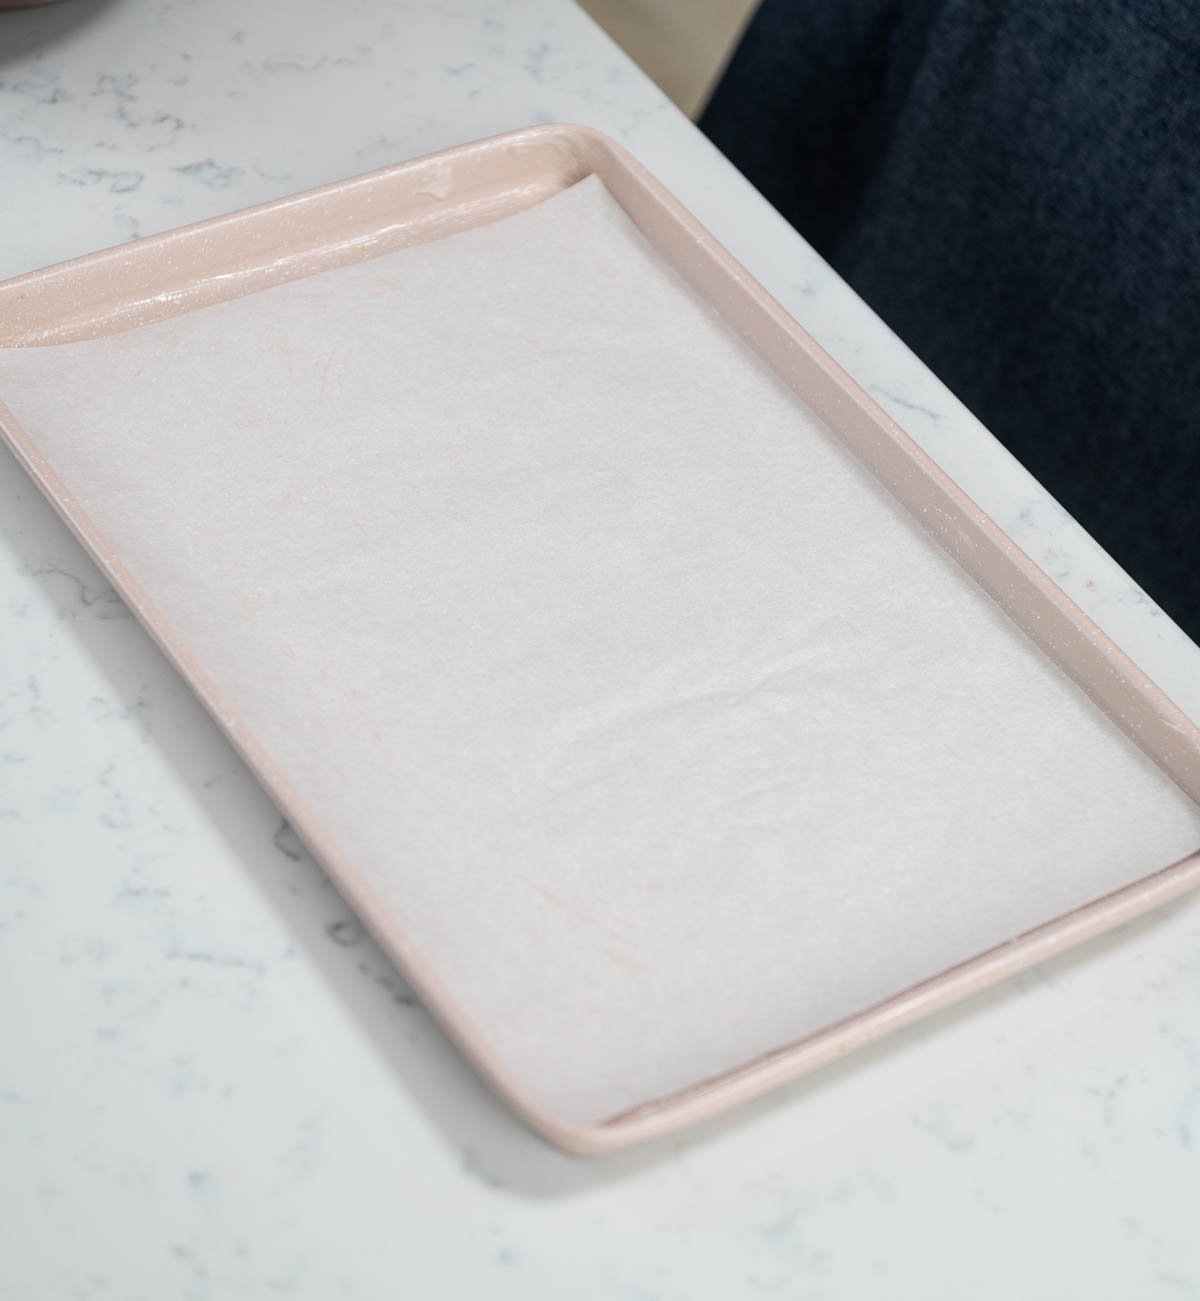 baking sheet lined with parchment paper